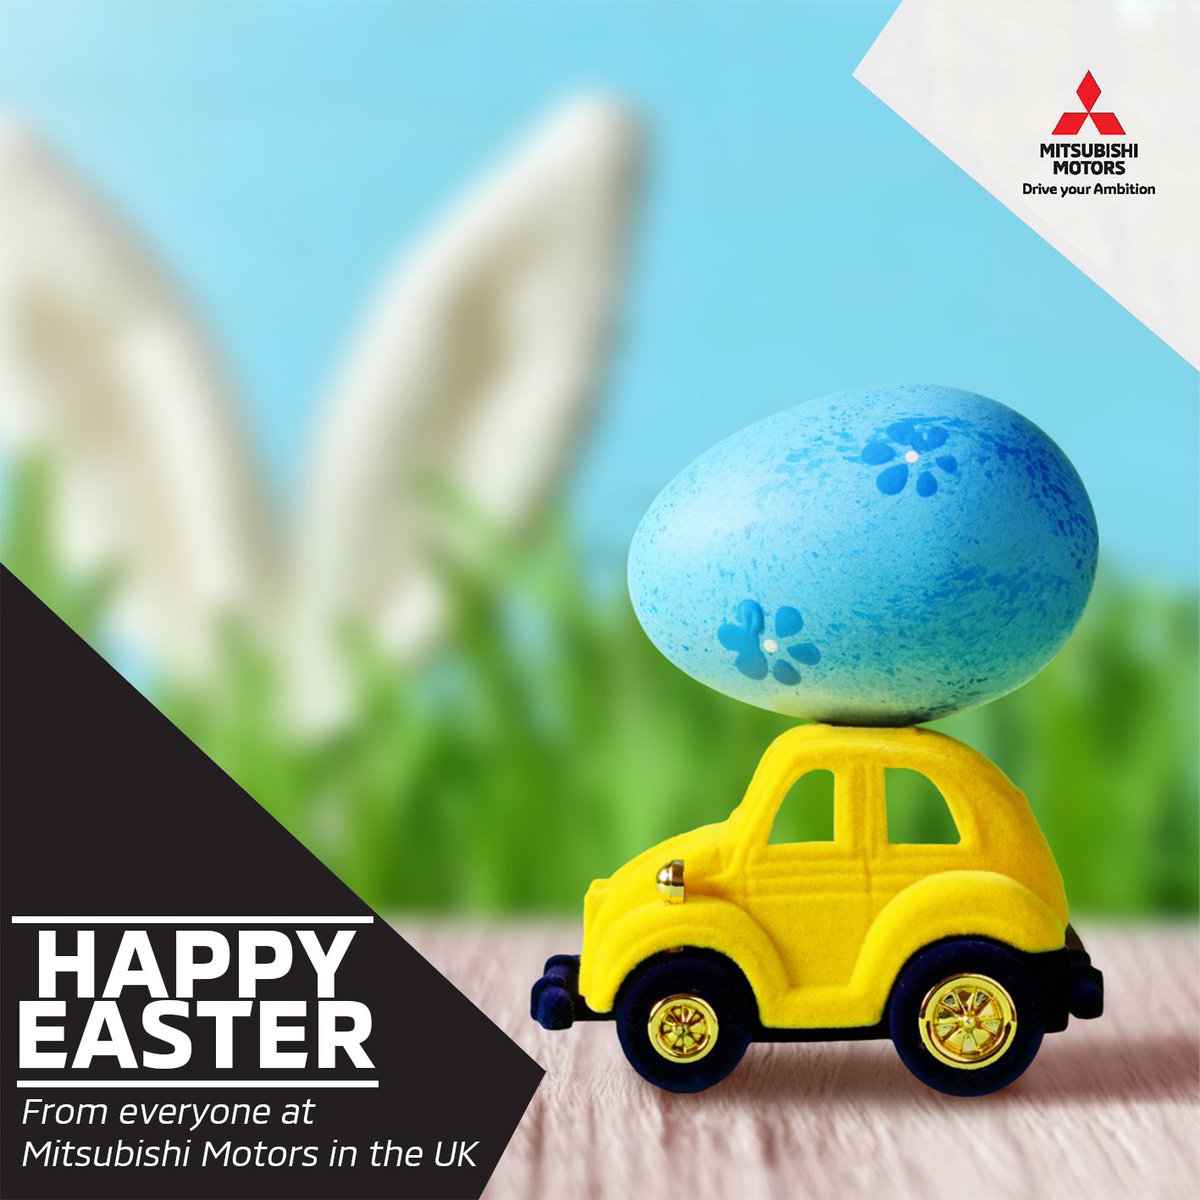 Happy Easter weekend to all our customers. Hope you have an egg-cellent time! 🐣